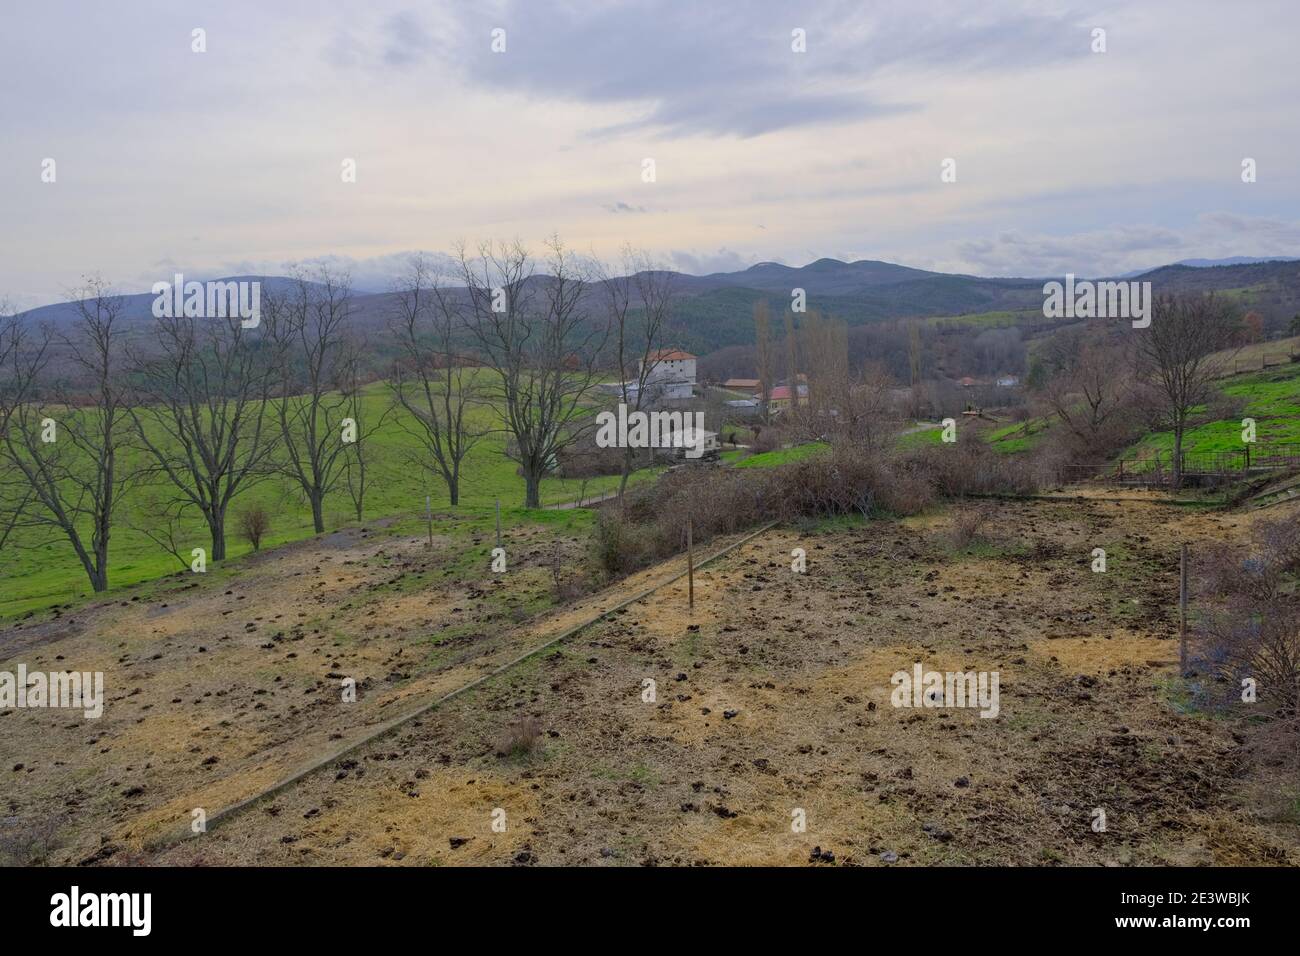 Valley view in Kardzali Bulgaria green grass, dried and withered plants. Stock Photo